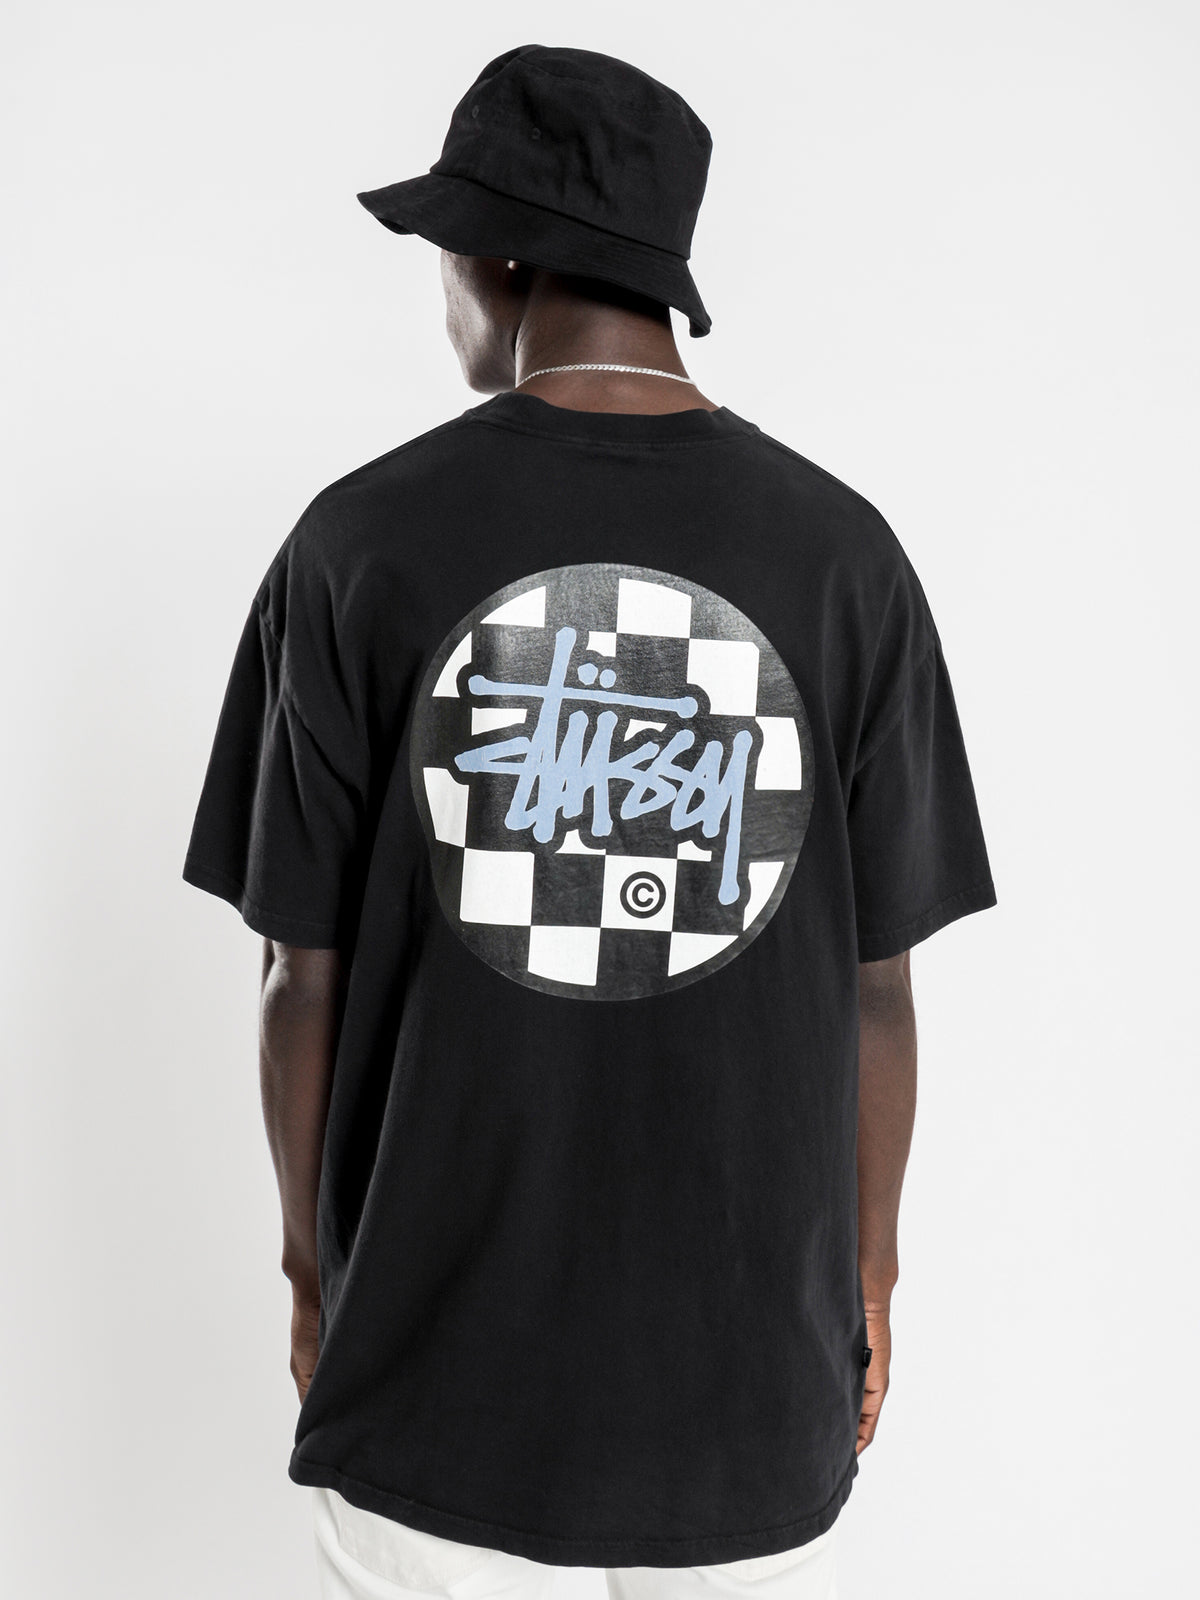 Chequer Dot Short Sleeve T-Shirt in Pigment Black